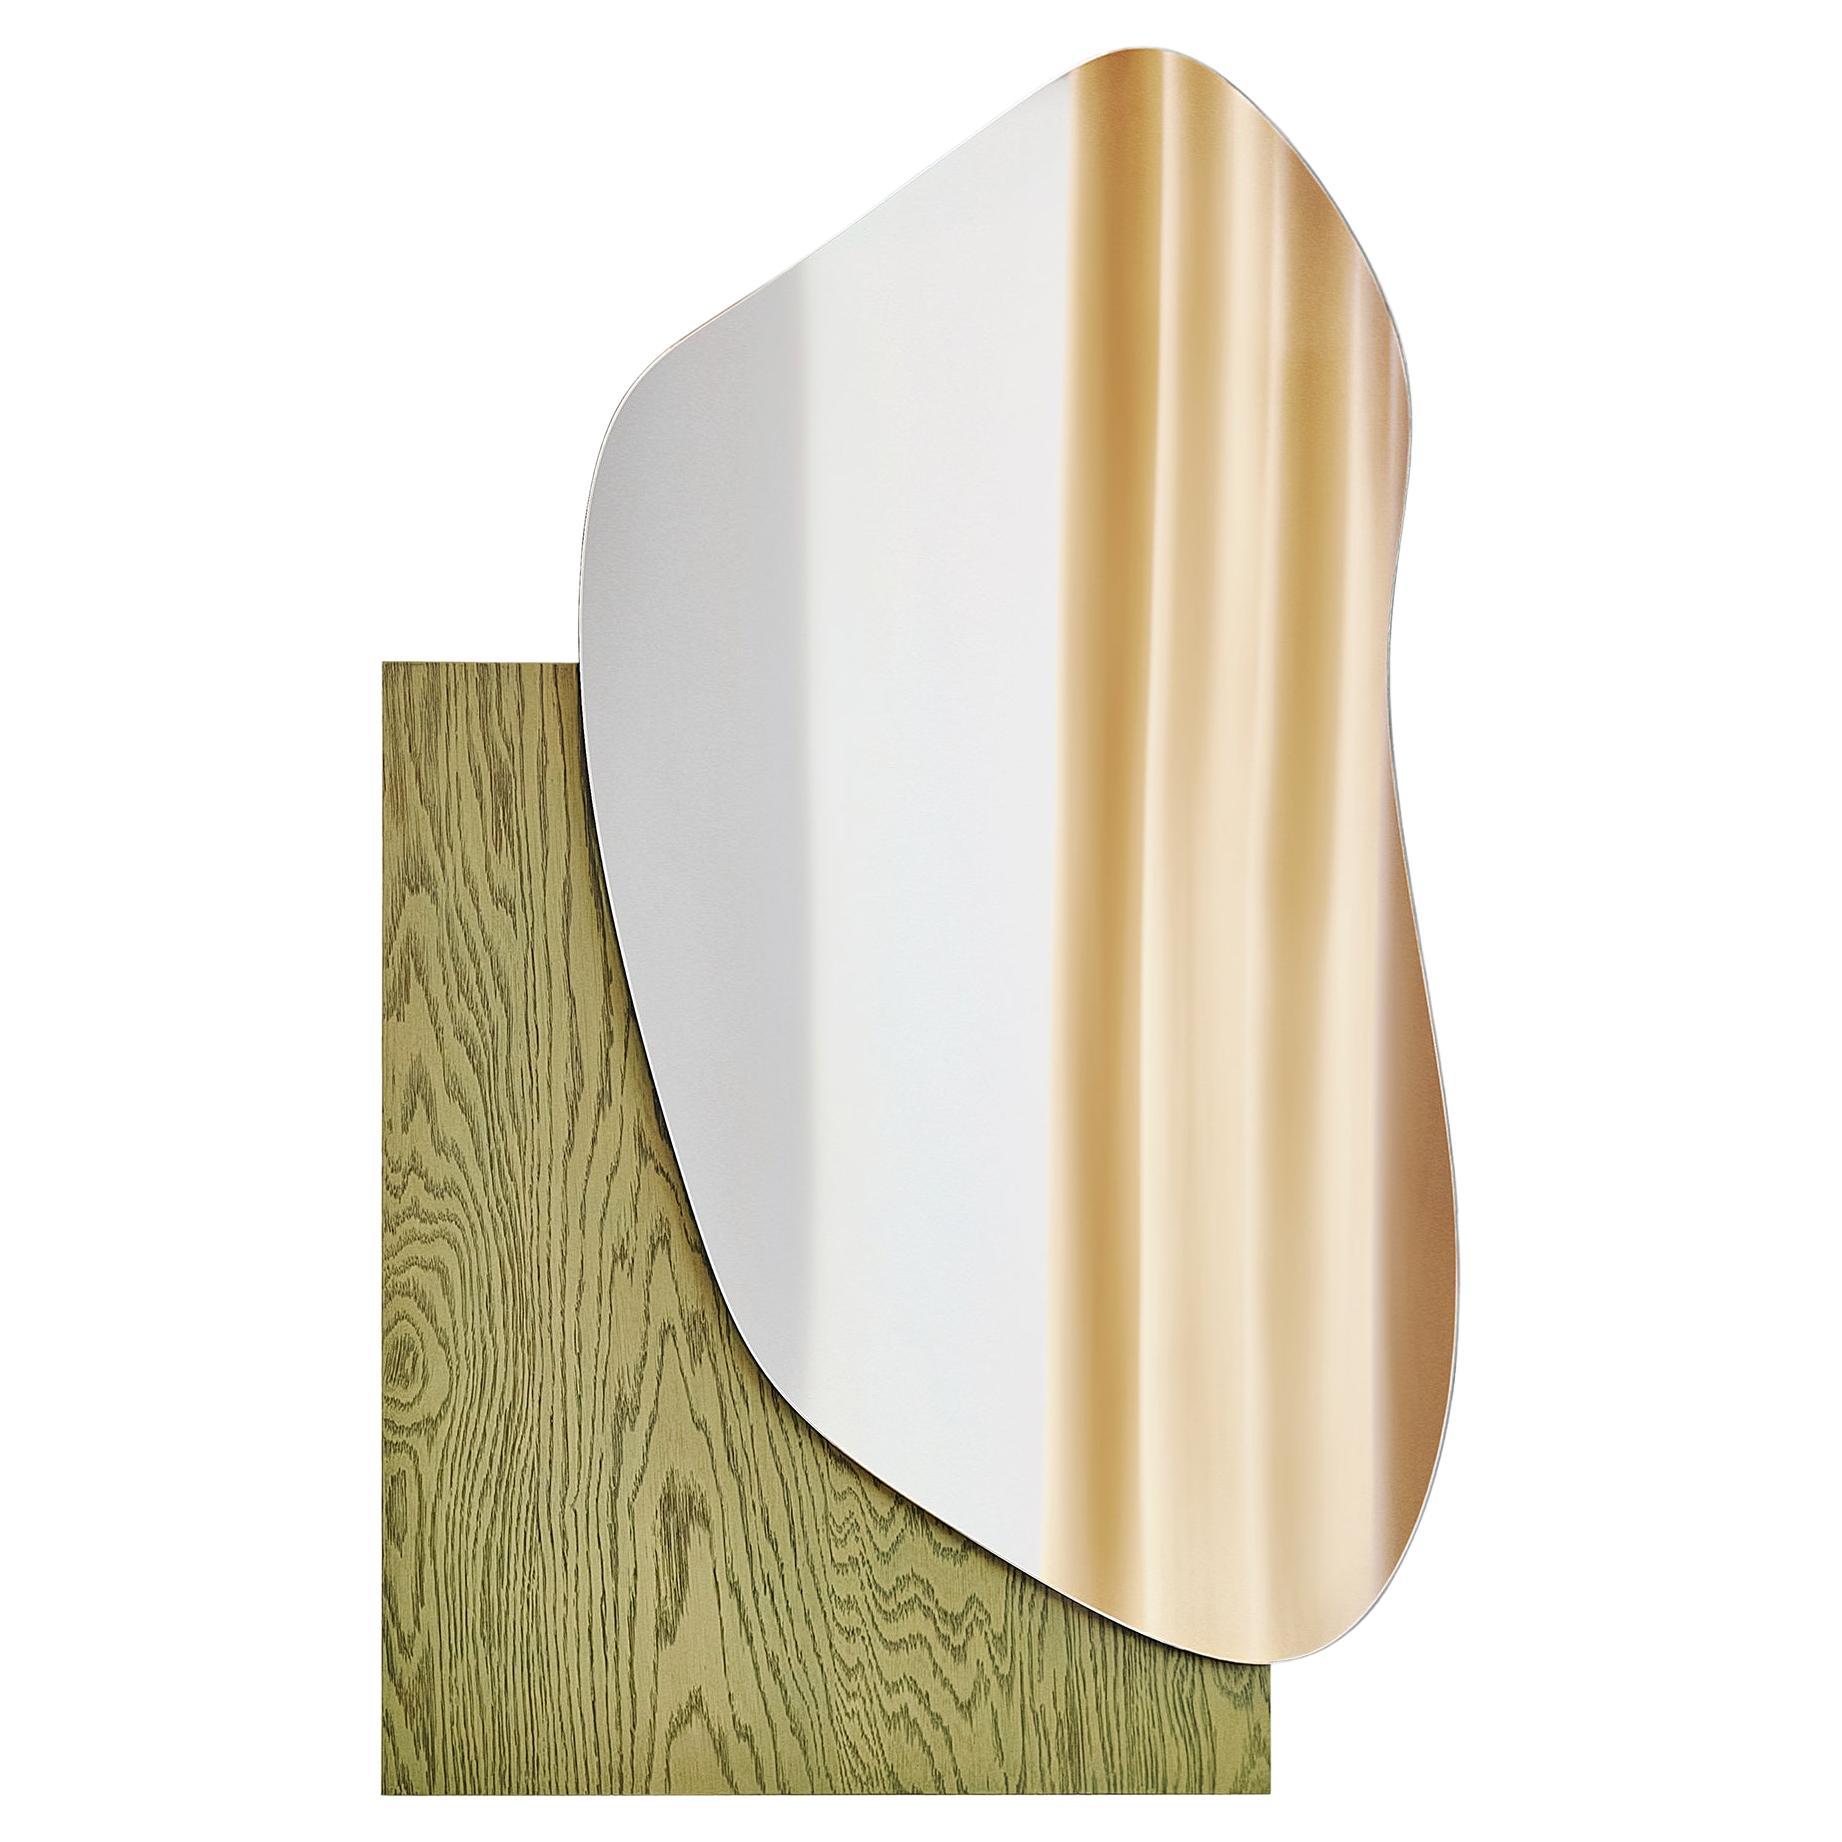 Modern Lake Wall Mirror by Noom
Designers: Maryna Dague & Nathan Baraness

Model shown in picture:
Number 1
Blue veneered wood

